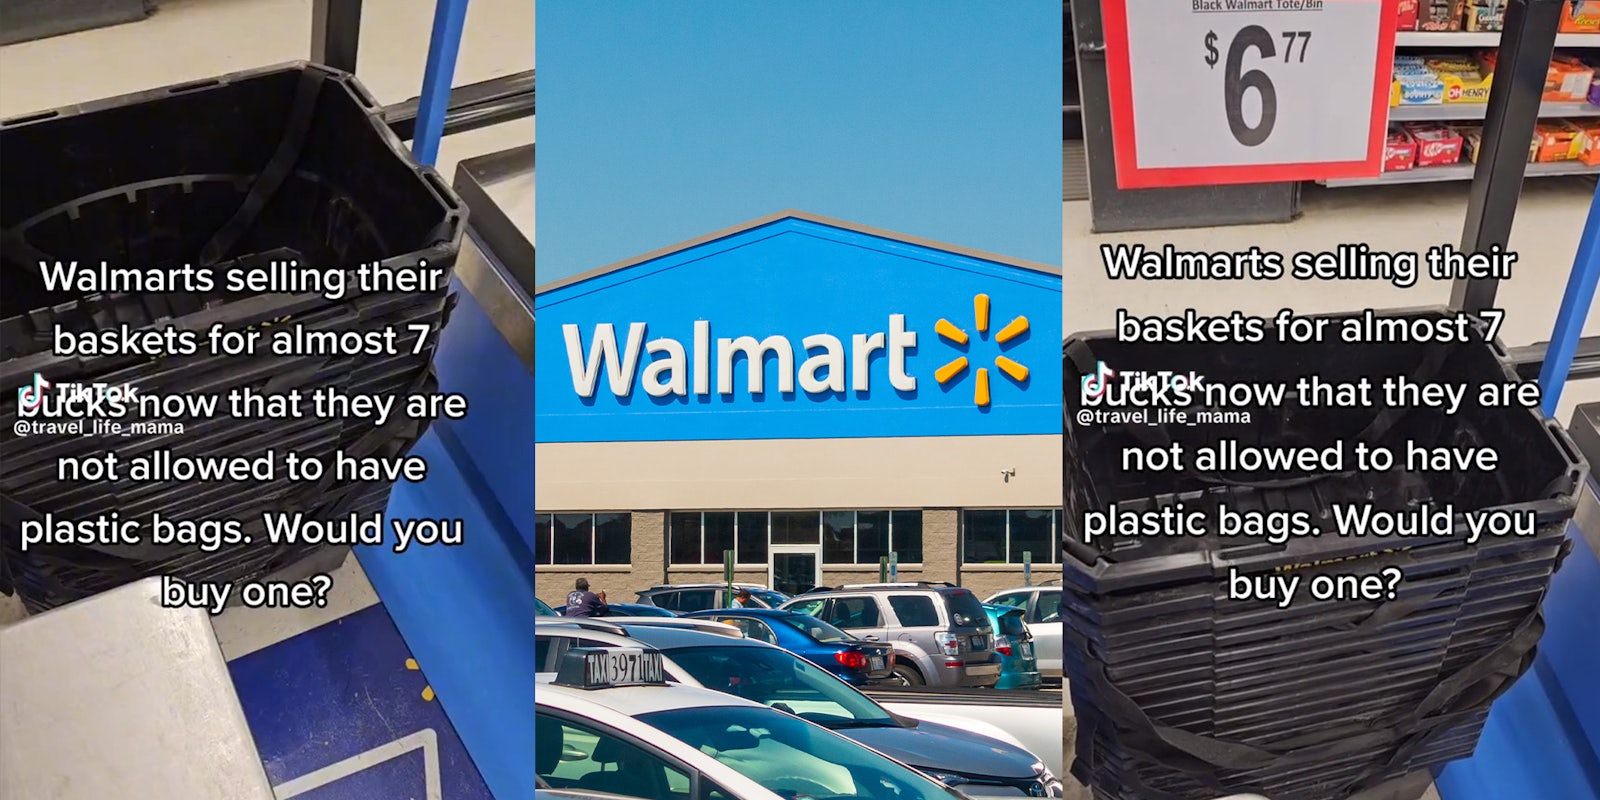 Customer says Walmart is now selling shopping baskets for $7 after ban on plastic bags